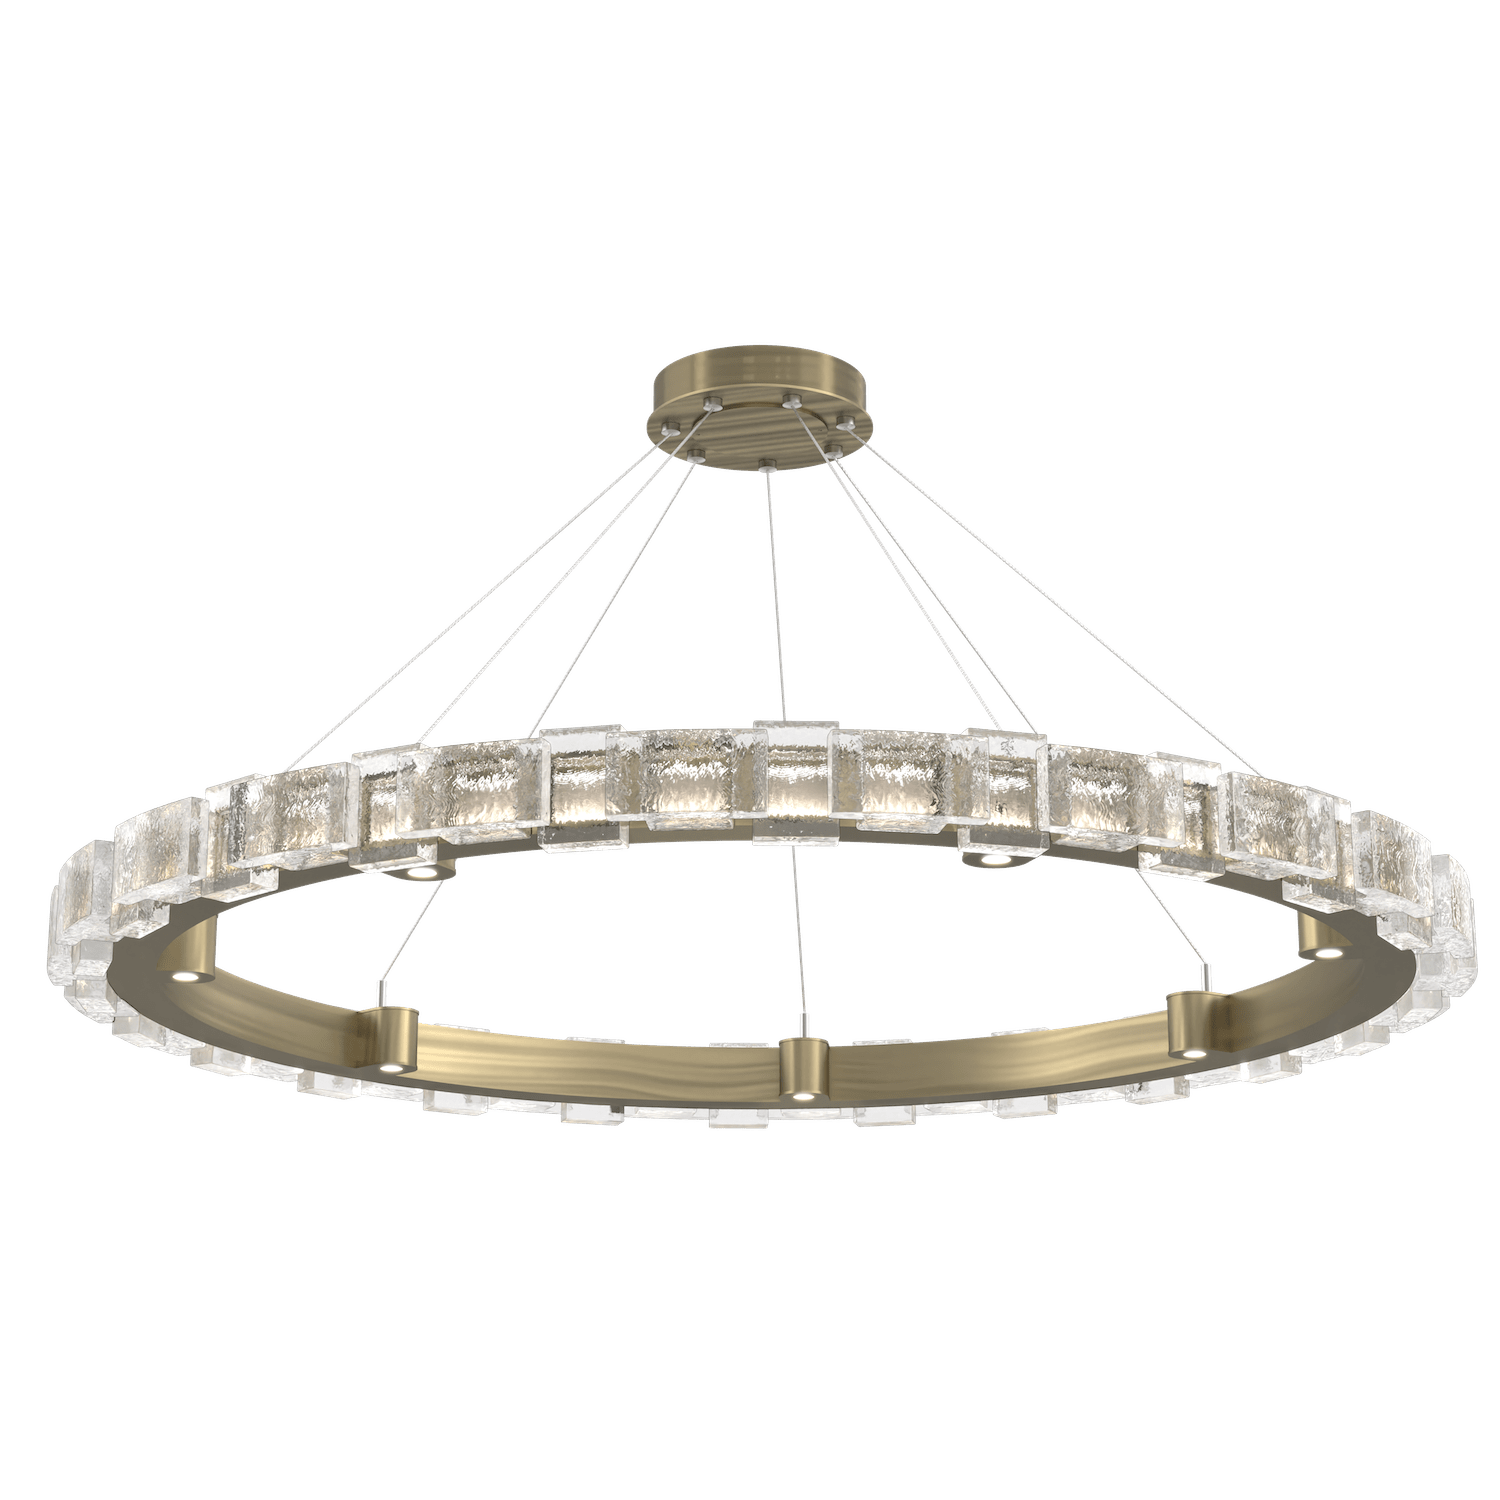 CHB0087-50-HB-TE-Hammerton-Studio-Tessera-50-inch-ring-chandelier-with-heritage-brass-finish-and-clear-tetro-cast-glass-shade-and-LED-lamping